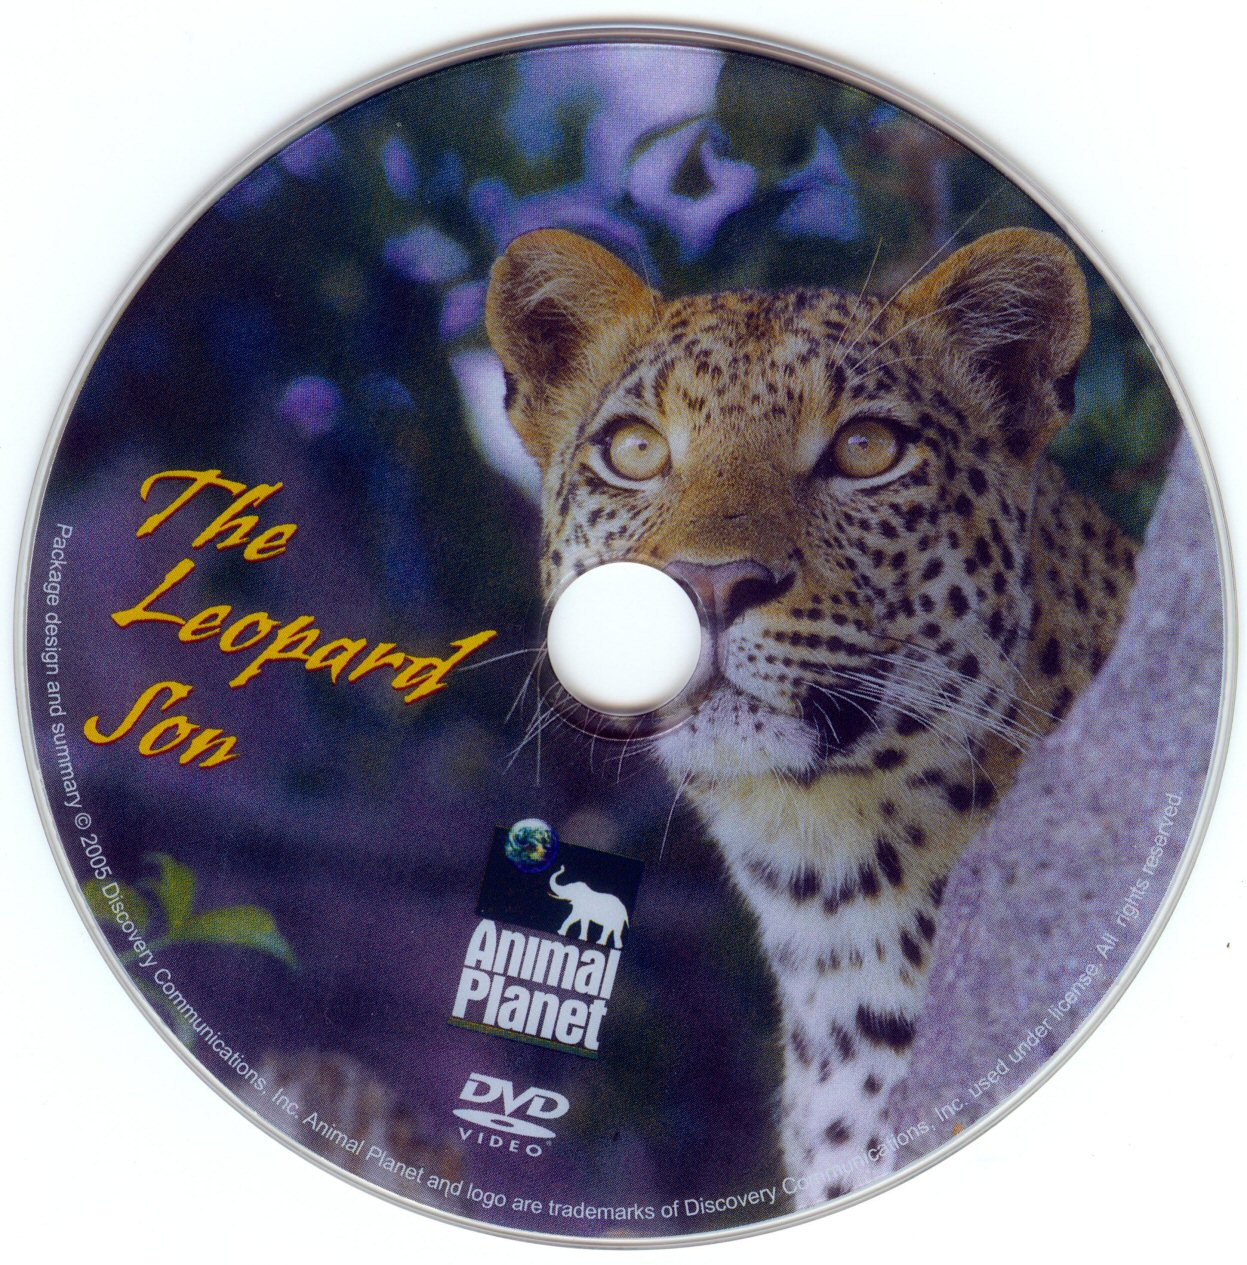 Click to view full size image -  DVD Cover - L - DVD - LEOPARDOV SIN - CD - DVD - LEOPARDOV SIN - CD.jpg